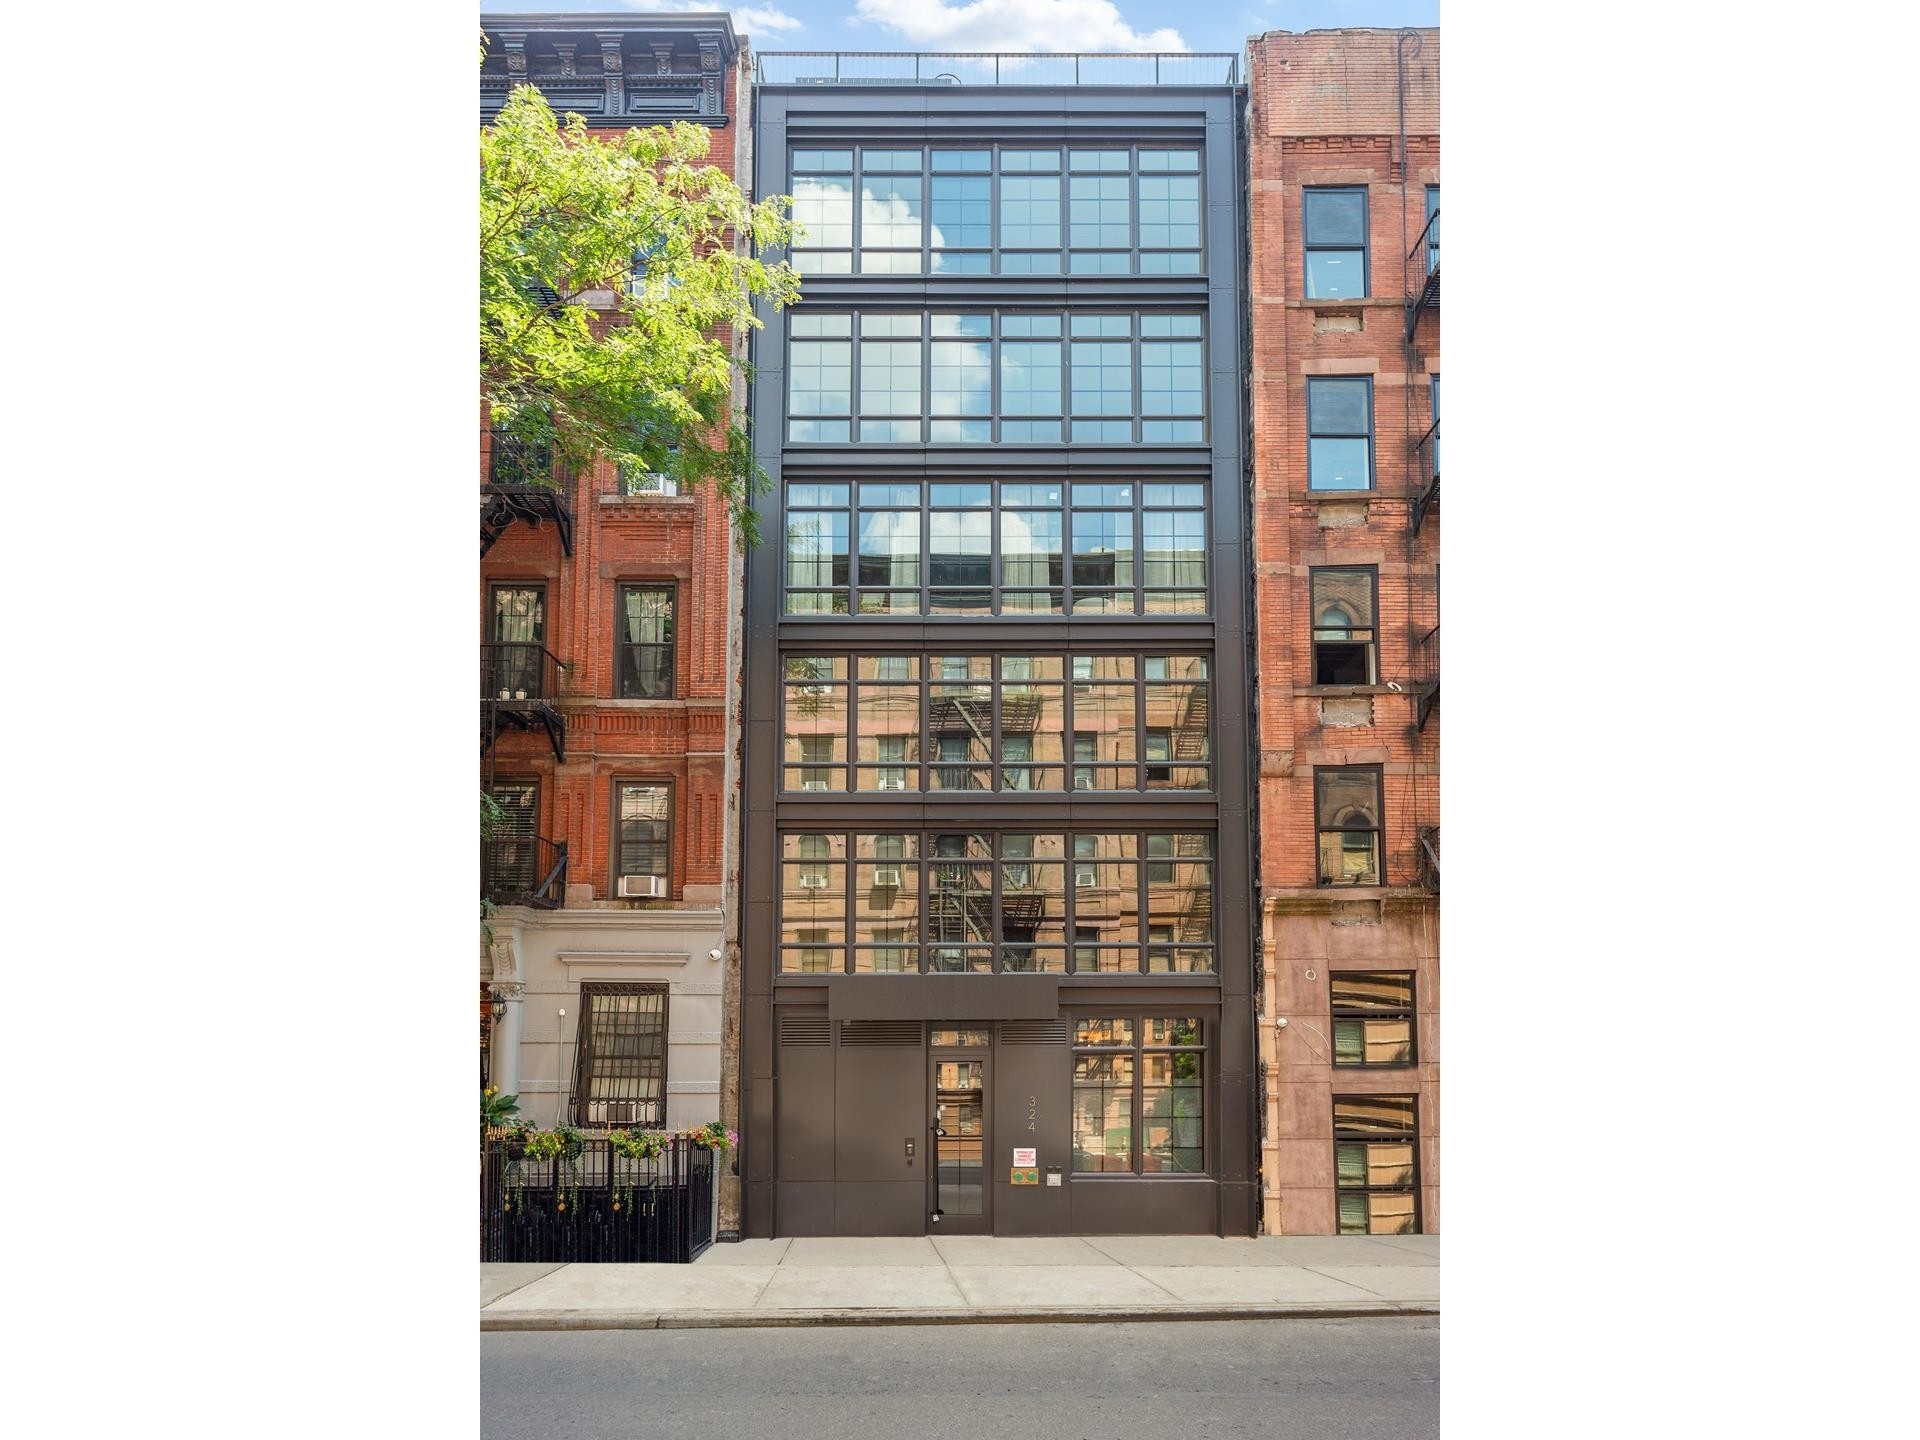 13. Condominiums for Sale at The Marx, 324 E 93RD ST, PENTHOUSE Yorkville, New York, NY 10128